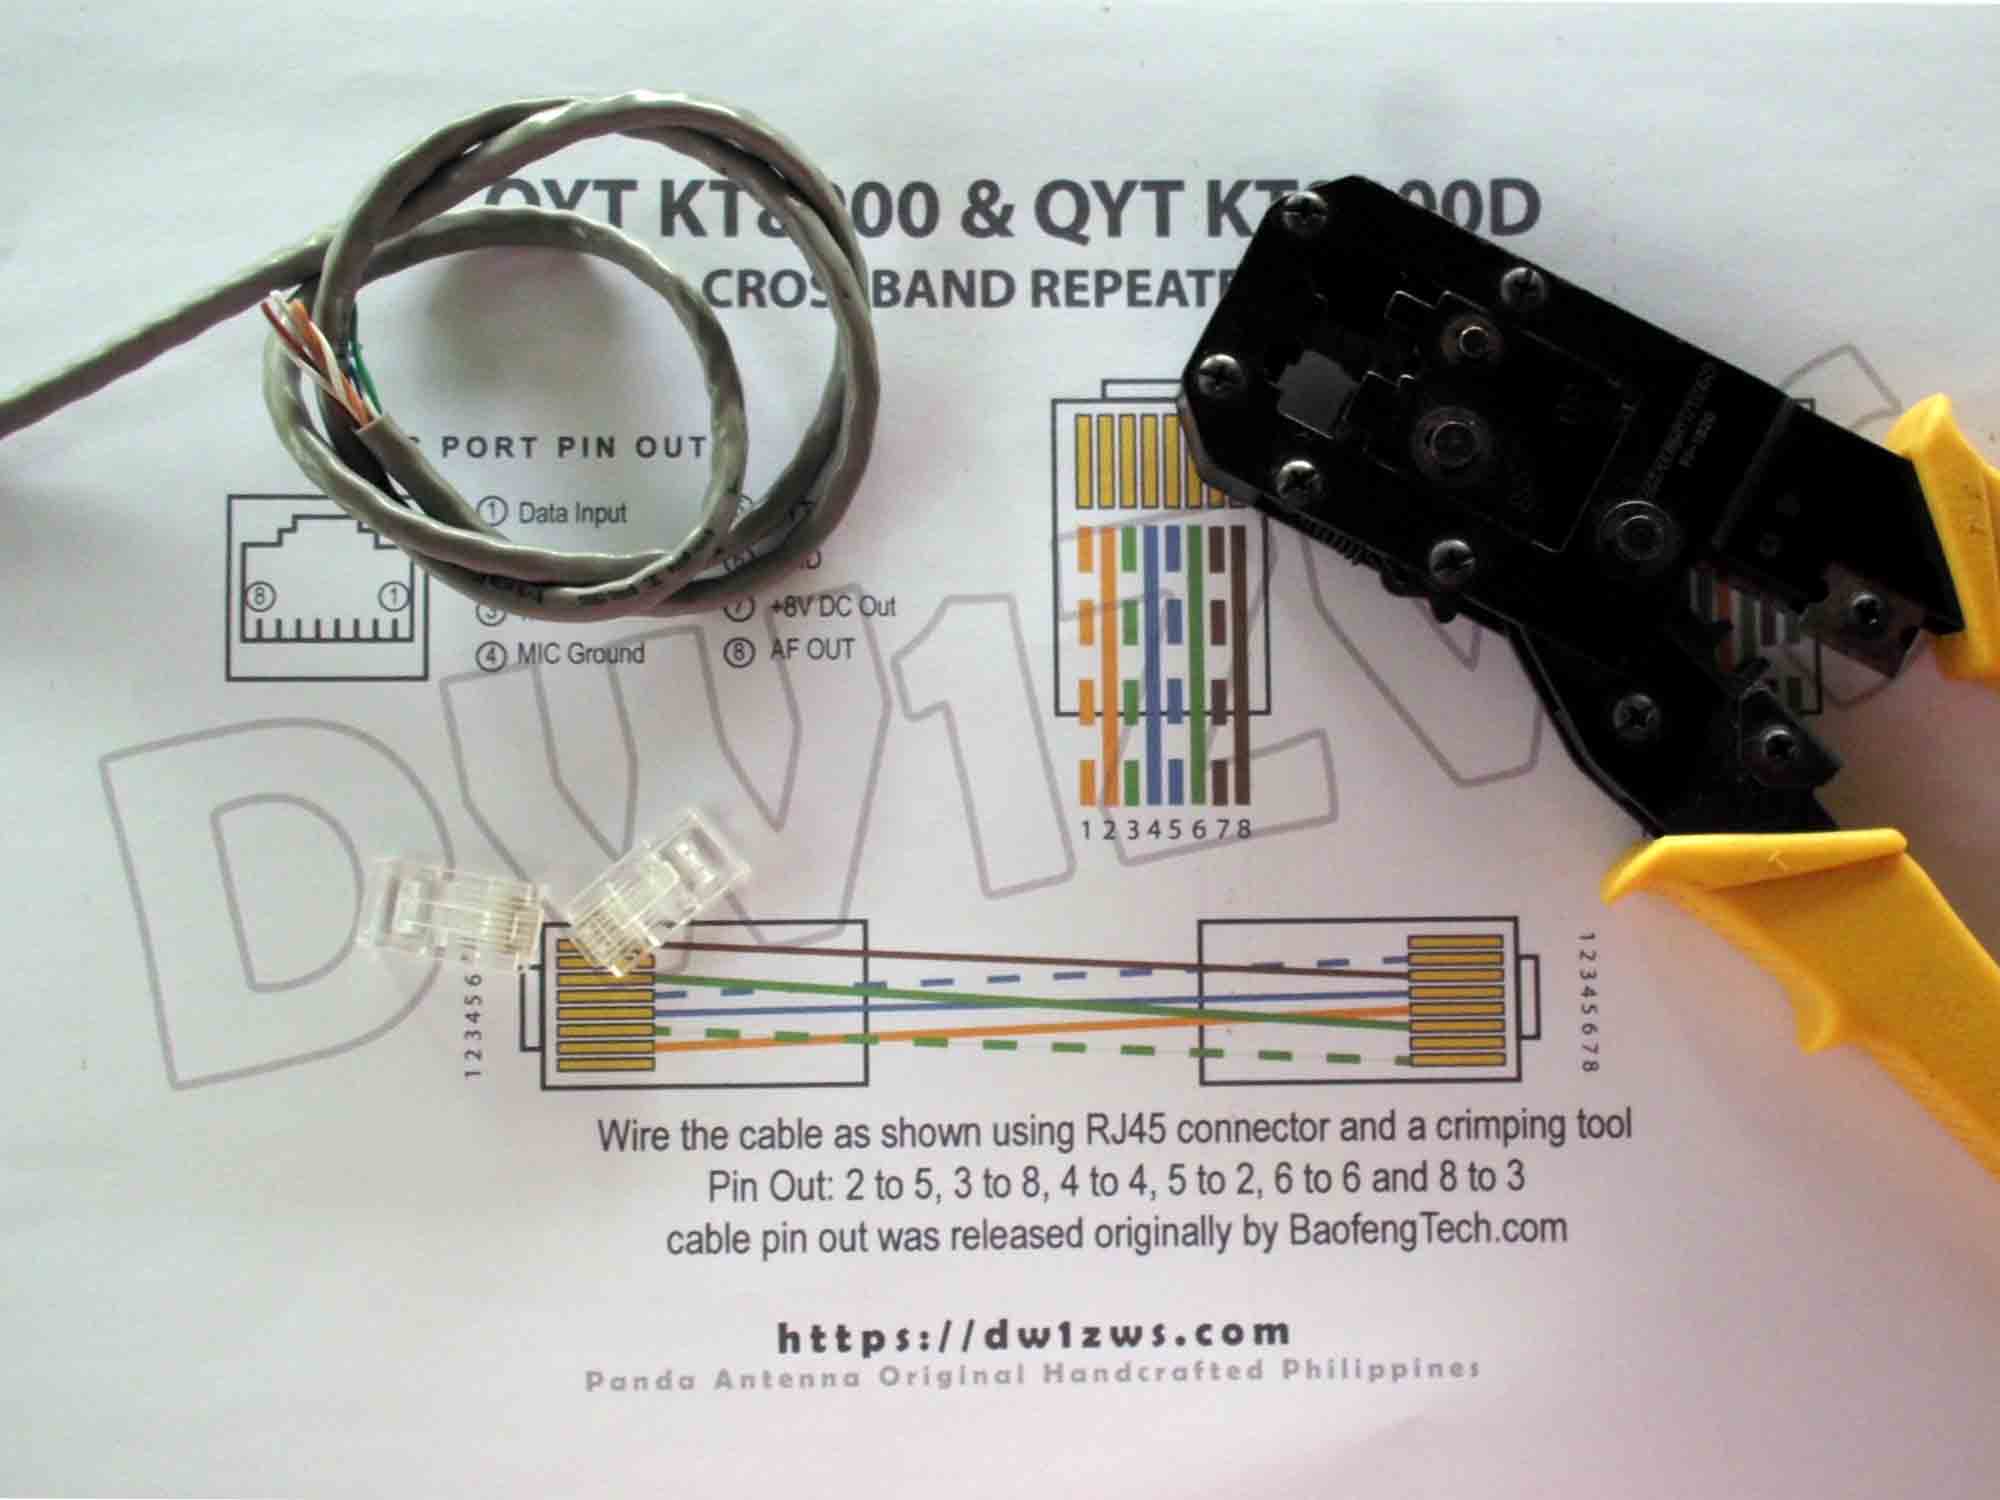 DIY X-Band Repeater Cable for KT8900 and 8900D and variants